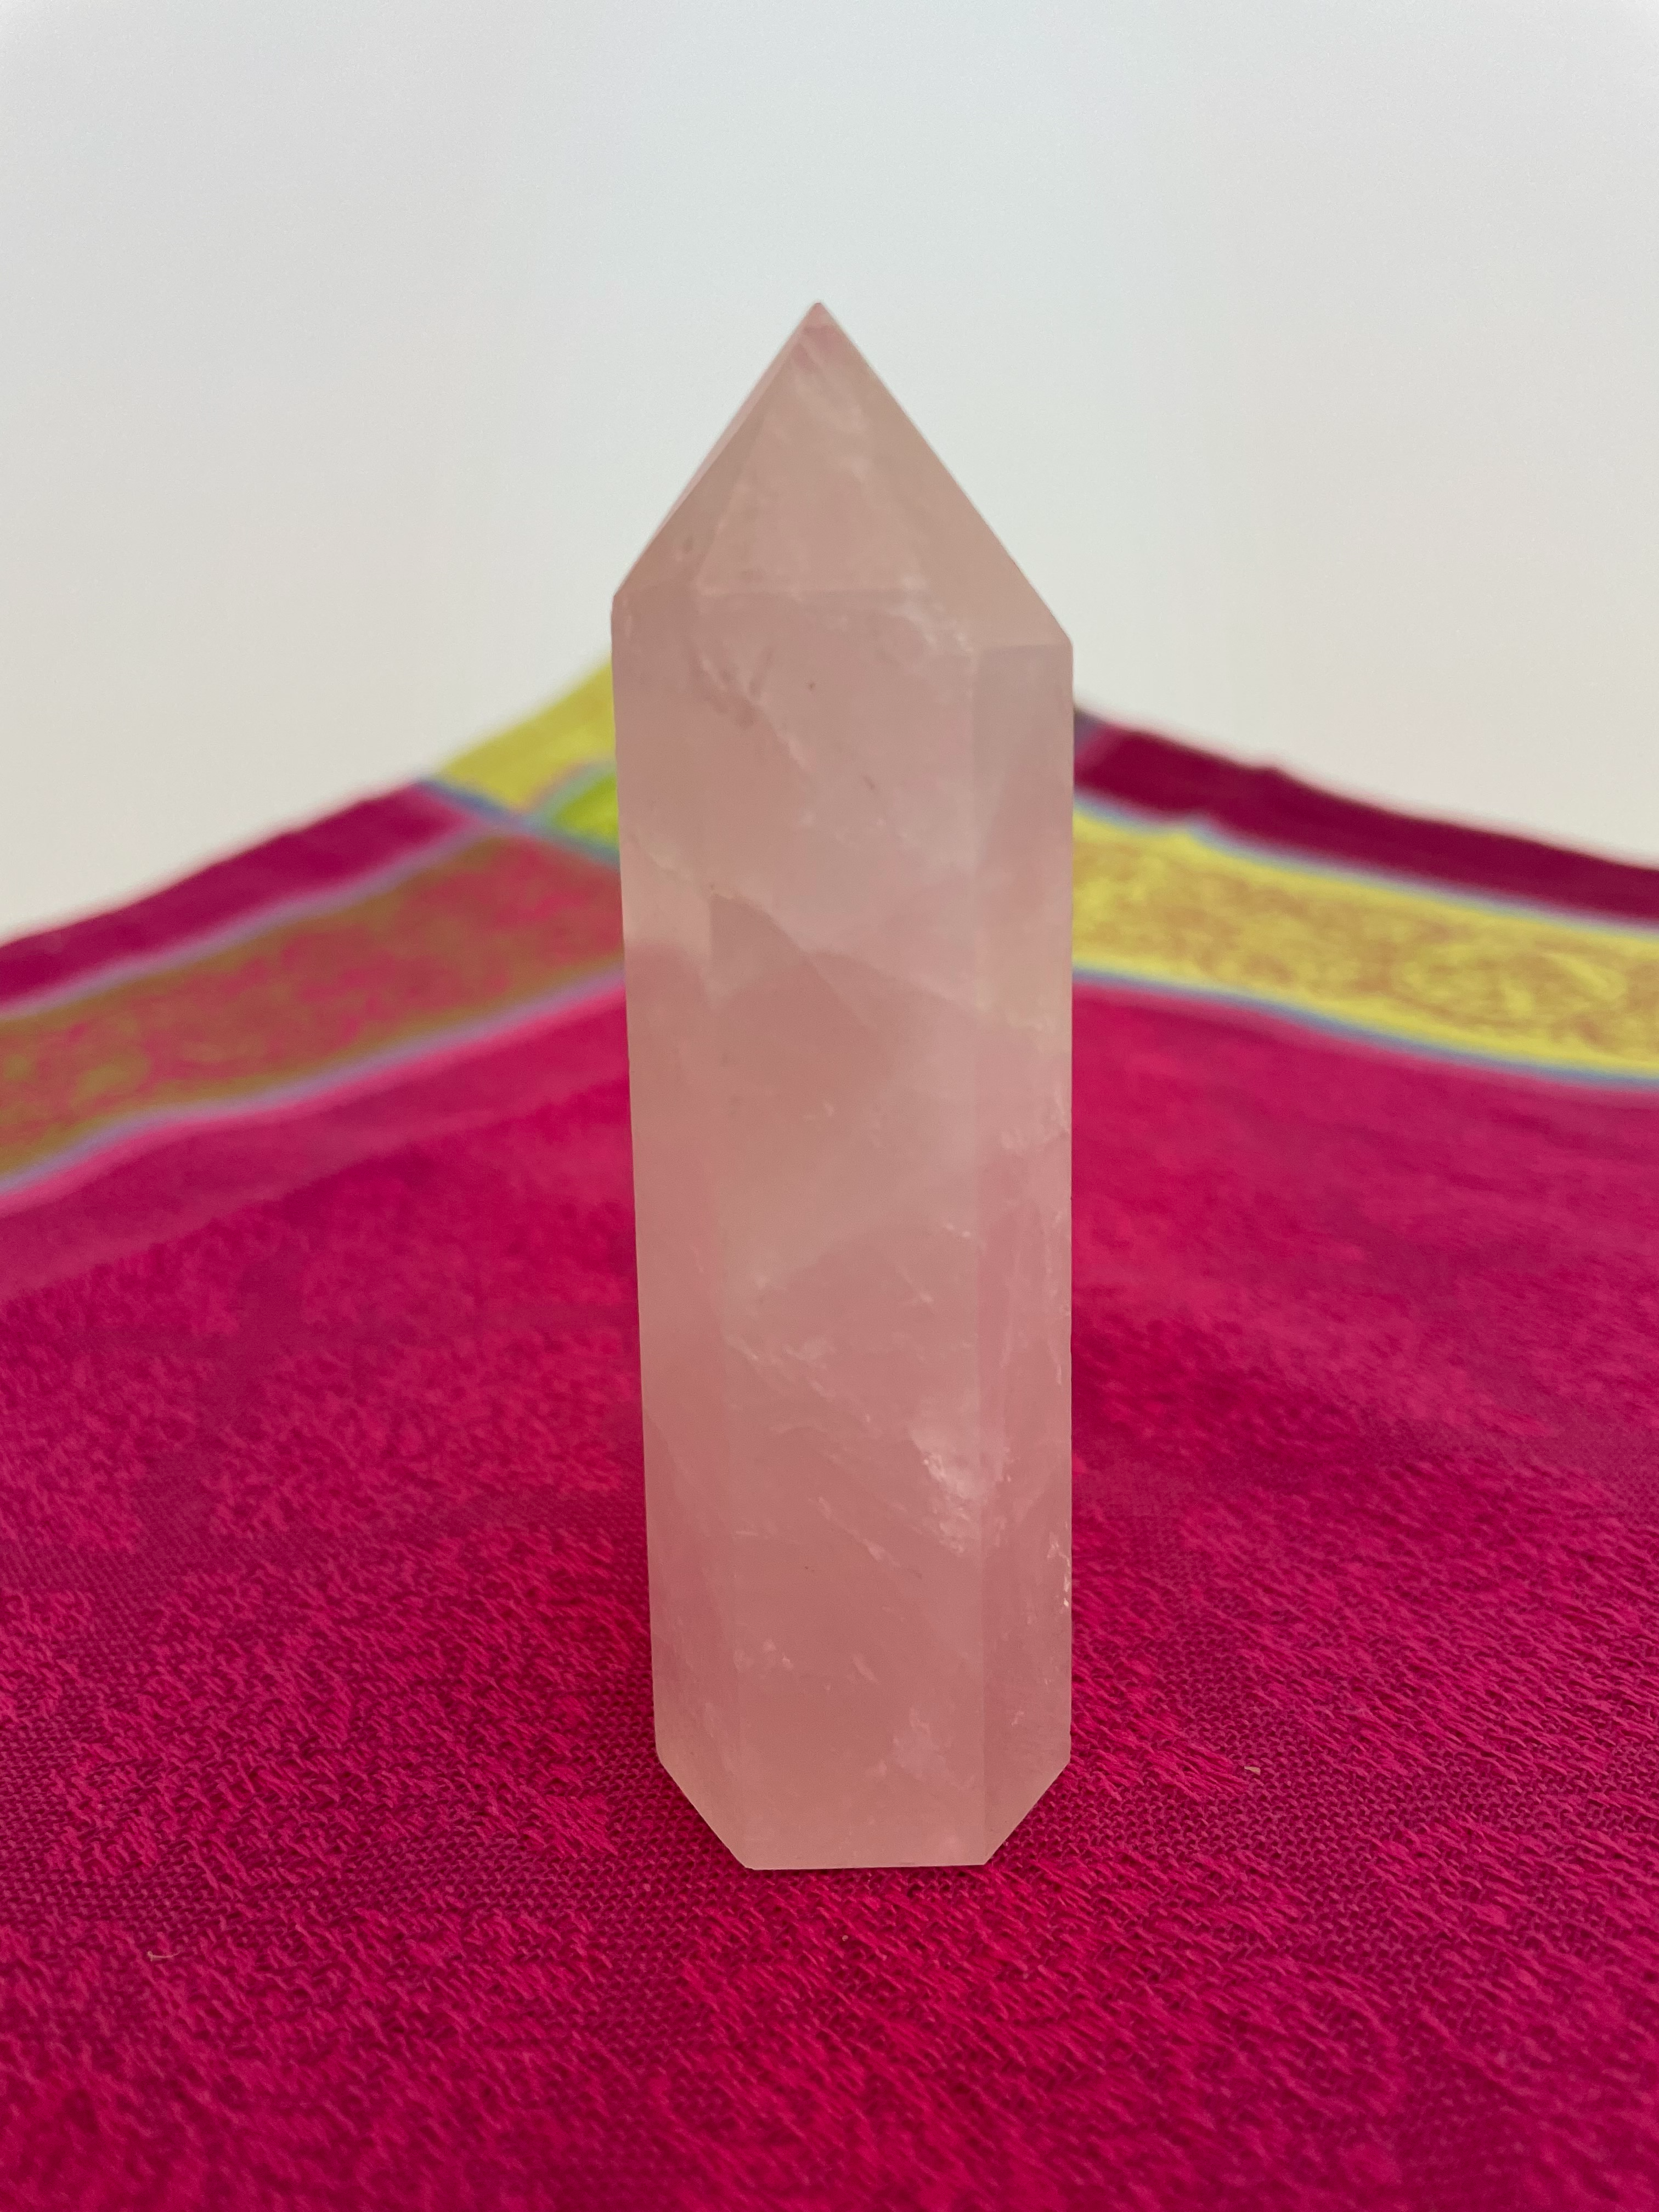 Alternate view. Rose Quartz tower of love 💗. Beautiful rose quartz tower for your altar, for healing or as décor for any room in your home or office. Rose quartz is the ultimate love stone, for love of all types - to attract love and for self-love. It is soothing, enhances compassion, is the best emotional healer, dispels negative energy, opens your heart and so much more.  Approx. 3¾" long. See photos below for views of all sides. Cost is $18.00.